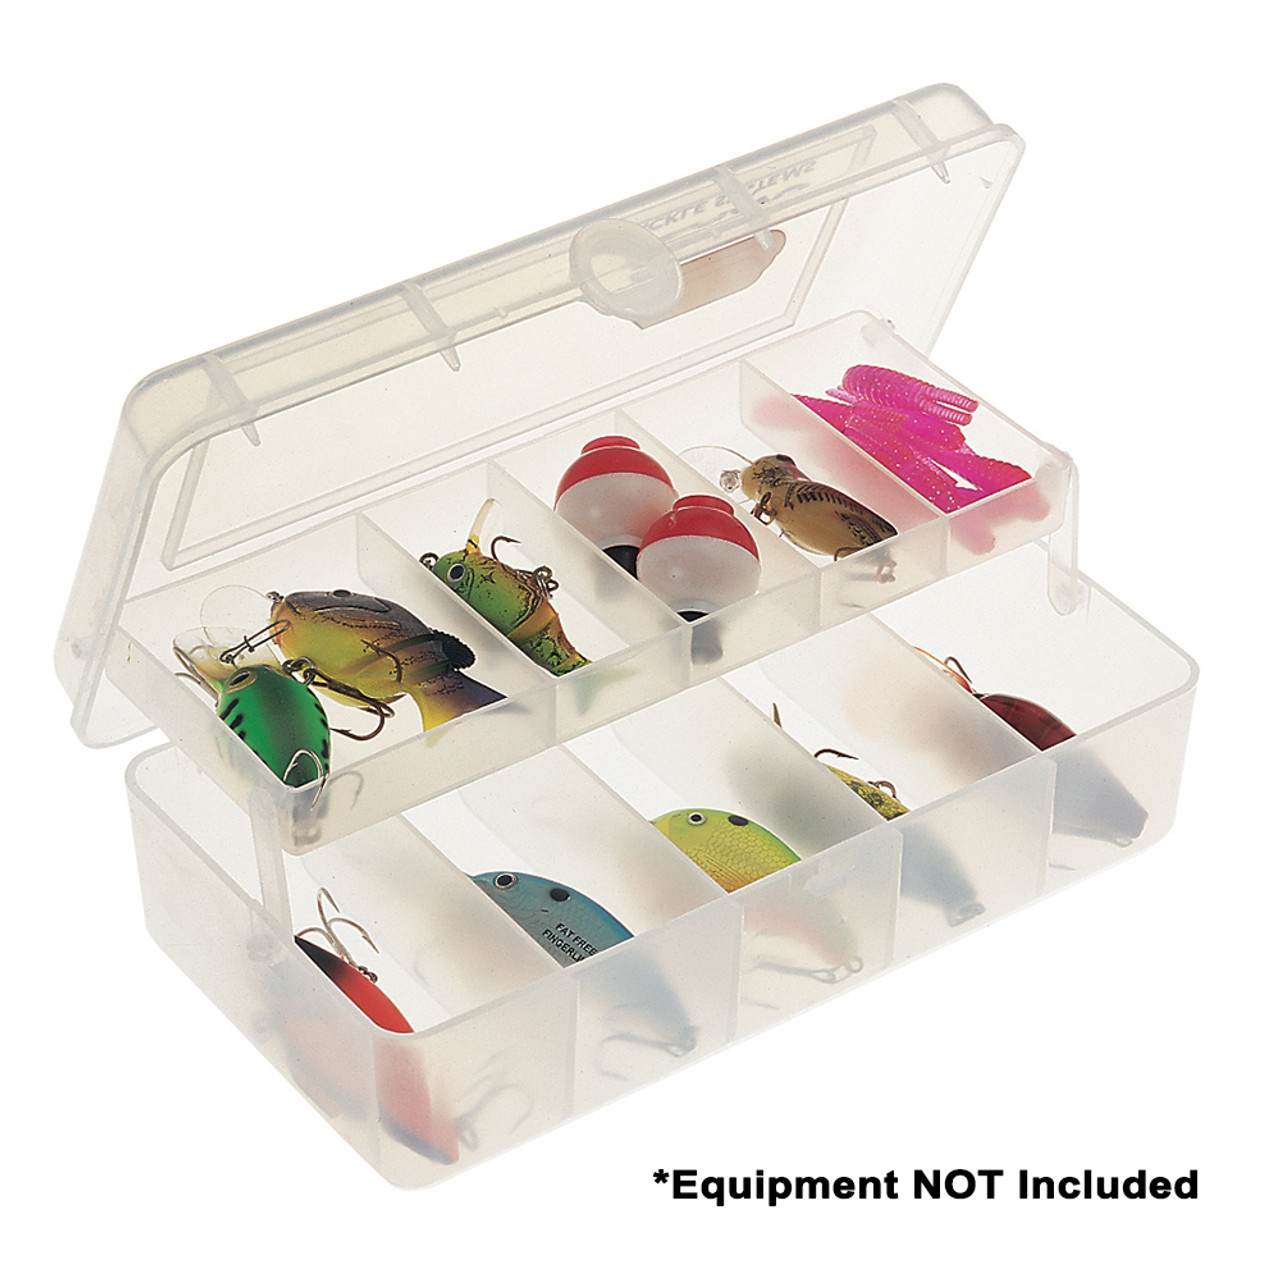 Beoccudo Tackle Box Bead Organizer 2 Pack Fishing Tackle Box Organizer Plastic Compartment Storage Box Container with Dividers (Clear Tacklebox)